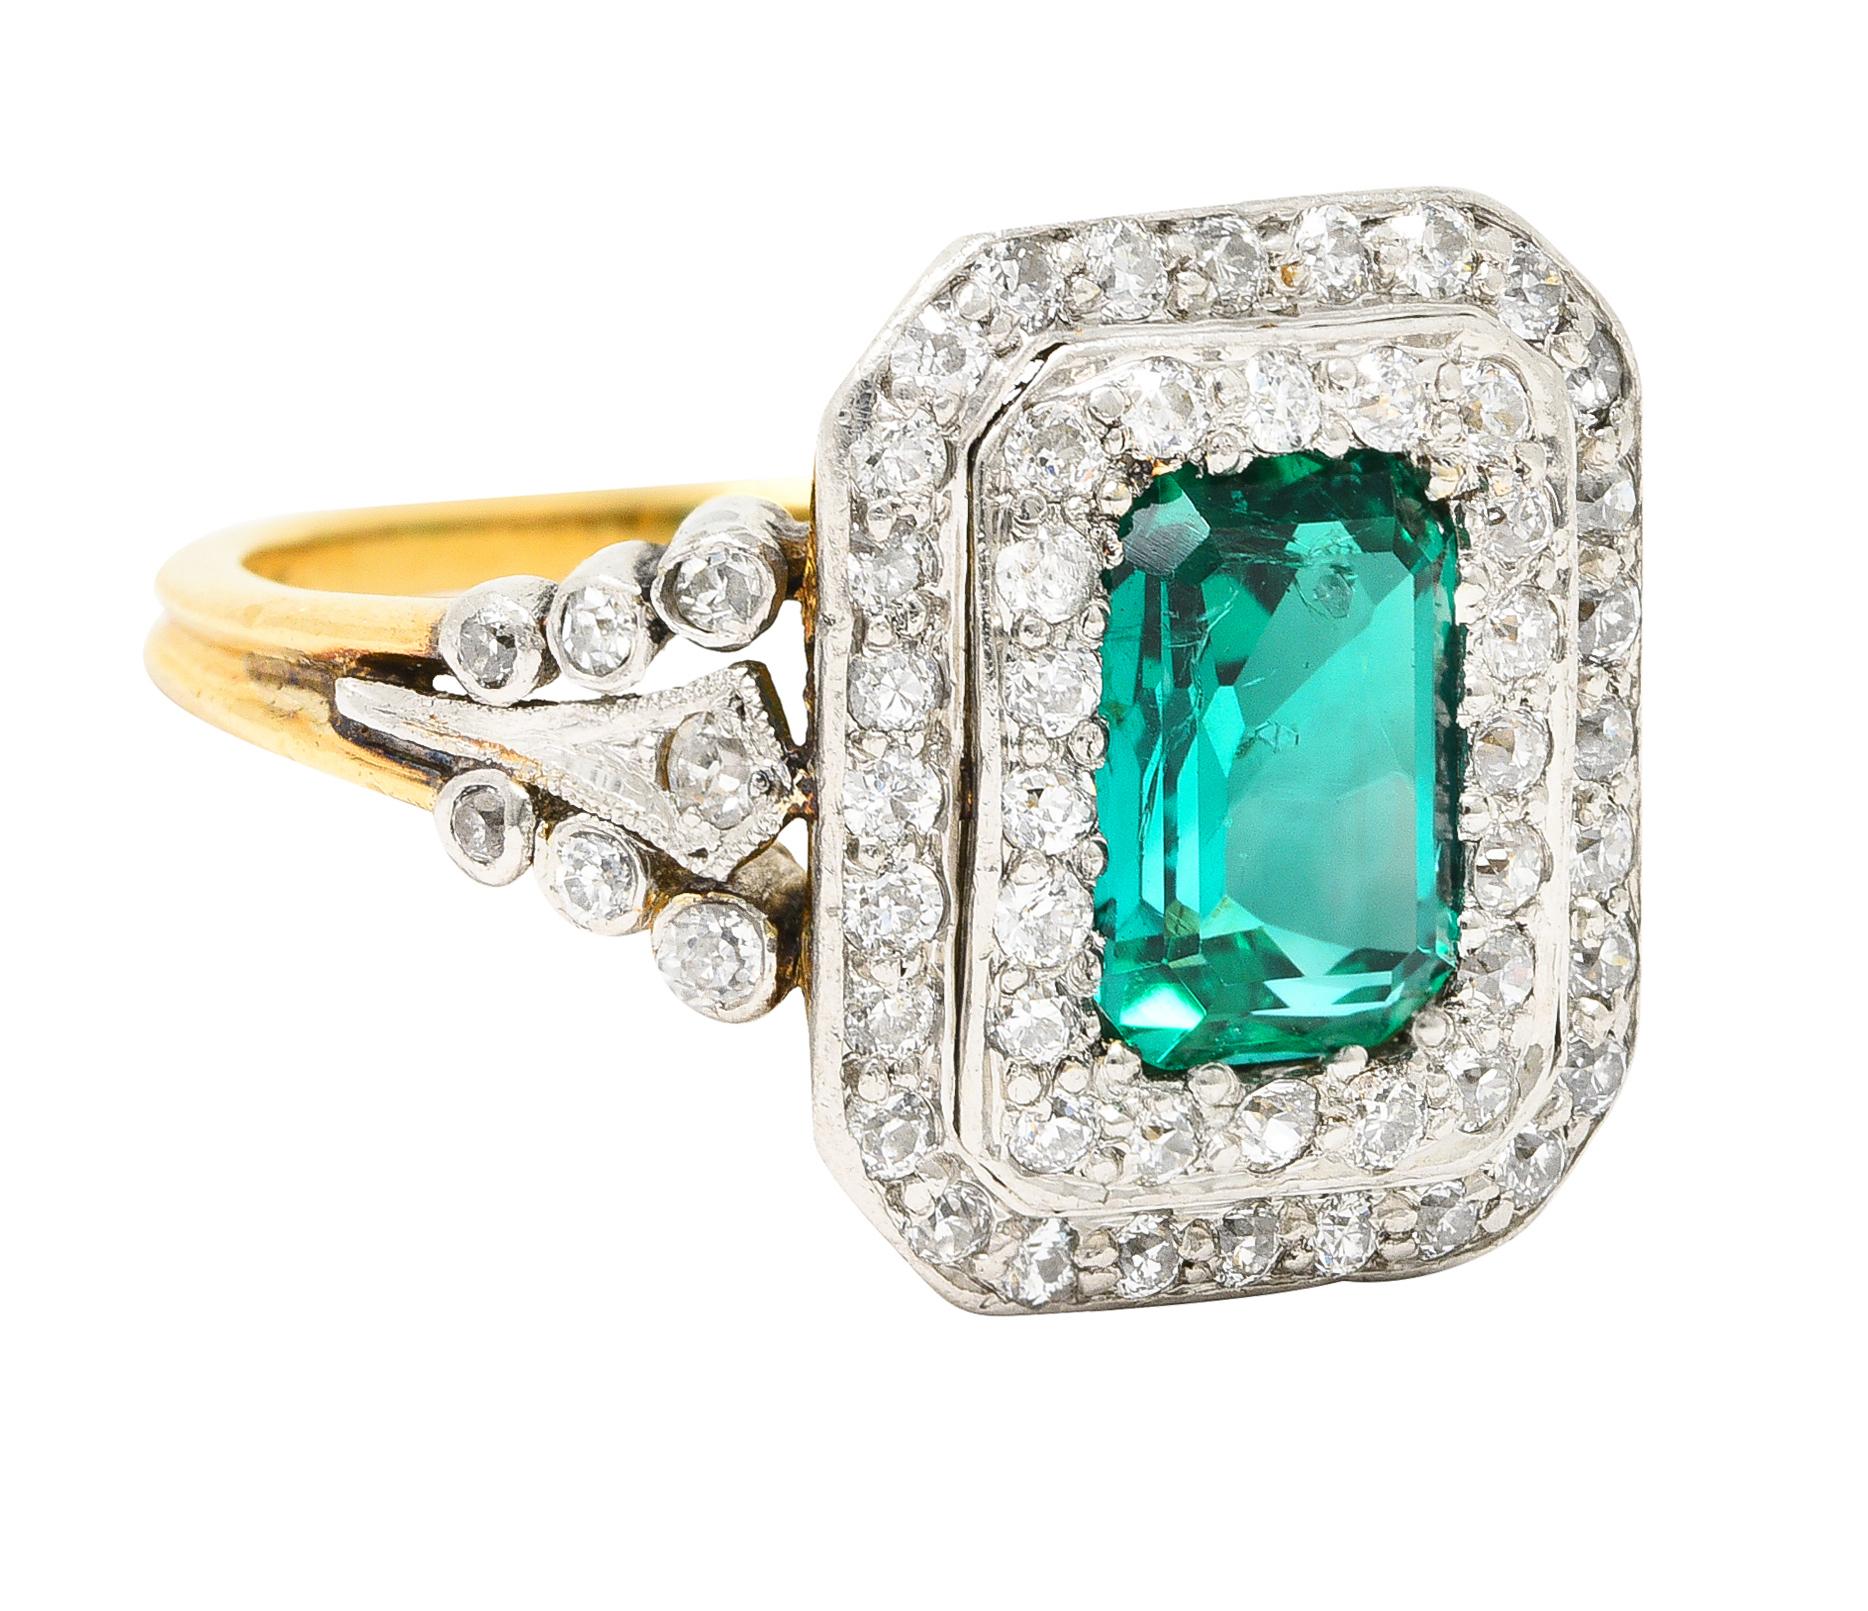 Centering an emerald cut emerald weighing 1.38 carats total - transparent medium green in color. Natural Colombian in origin with minor traditional clarity enhancement - bead set. With a stepped double halo surround of old European and single cut